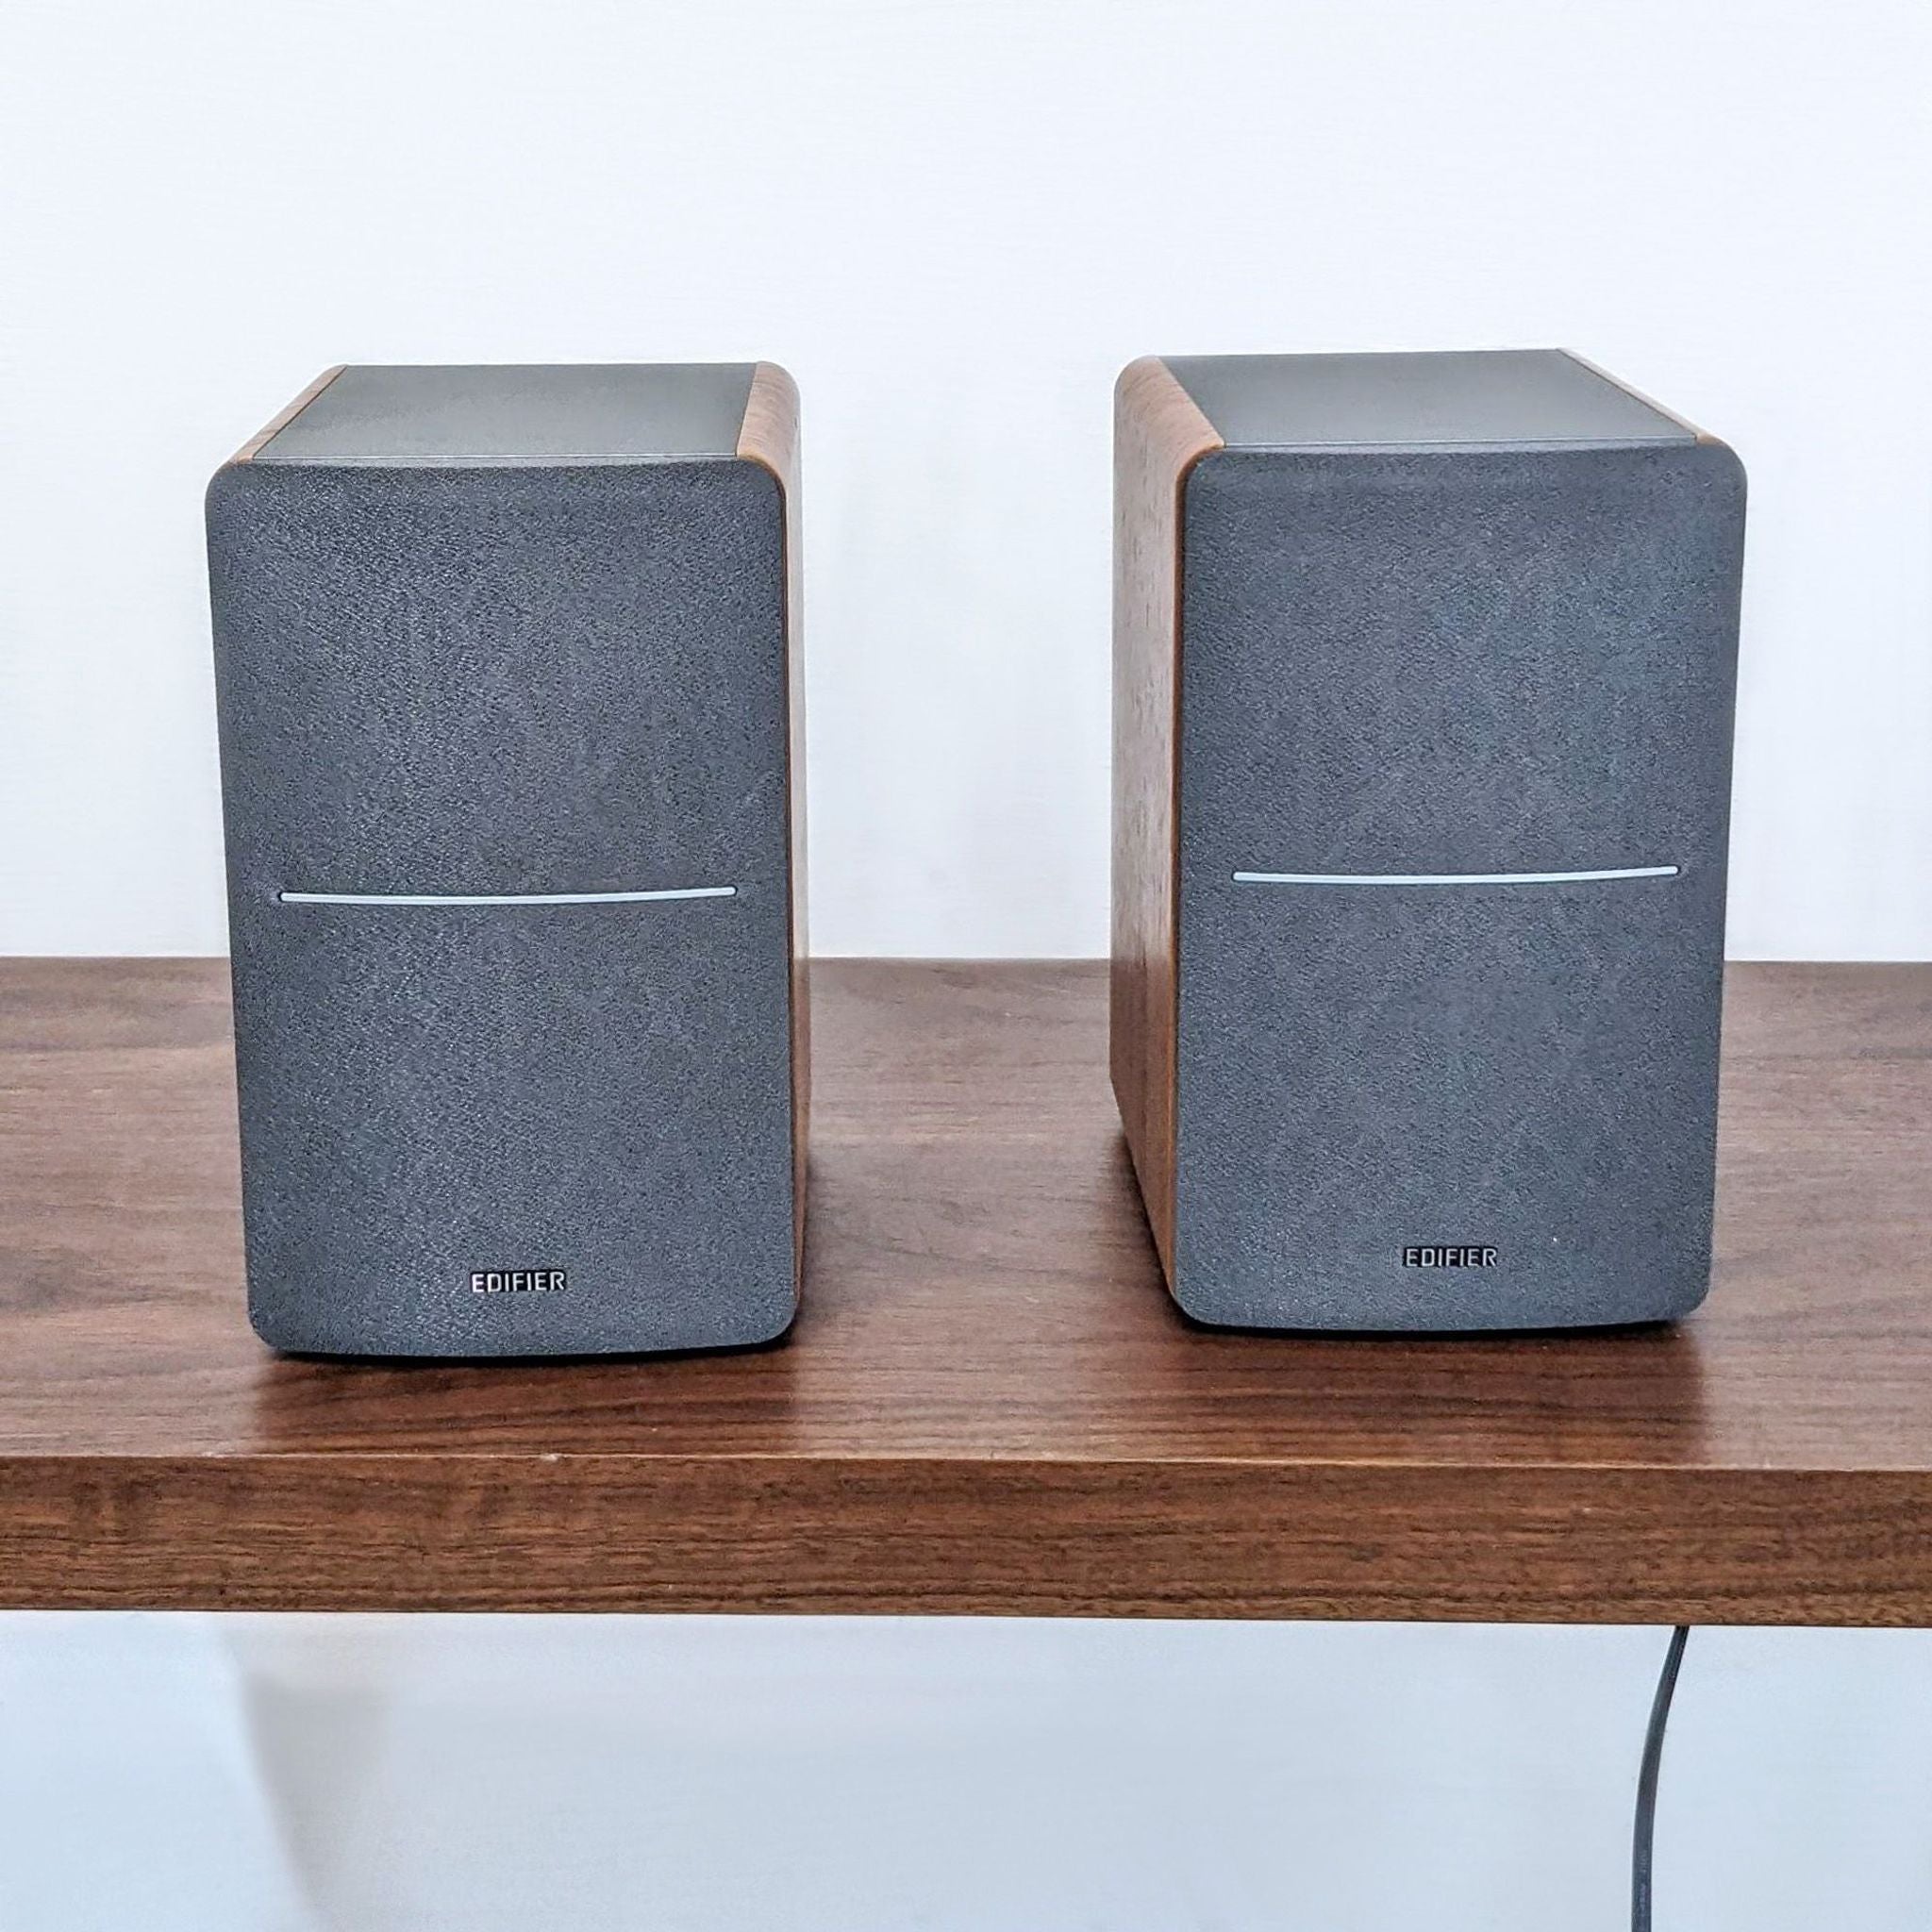 Edifier bookshelf speakers with wood-finish accents and Bluetooth connectivity for audio streaming.